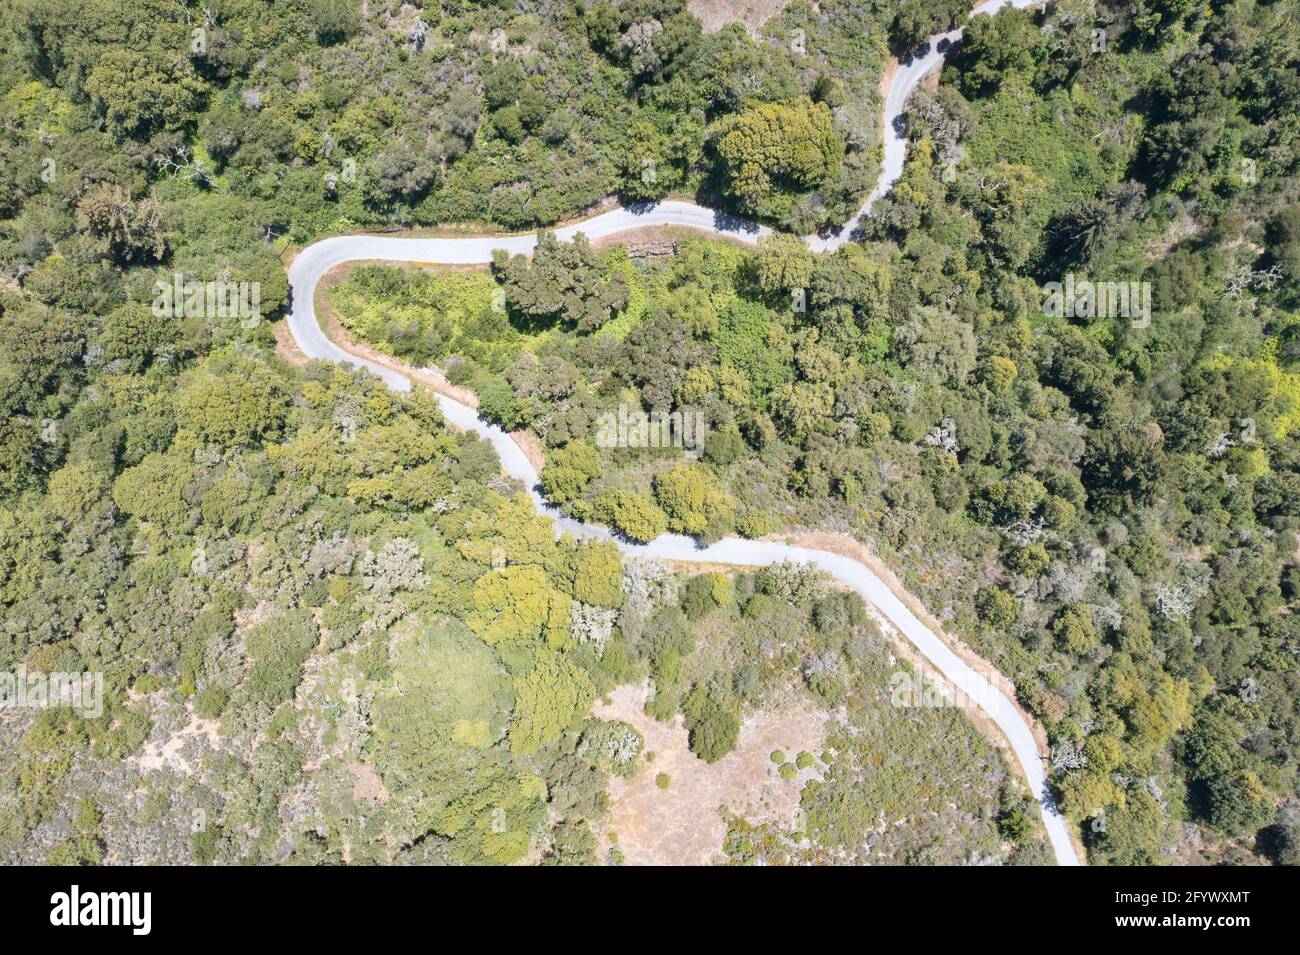 A scenic road meanders through the vegetation-covered hills of the East Bay, just a few miles from San Francisco Bay in Northern California. Stock Photo